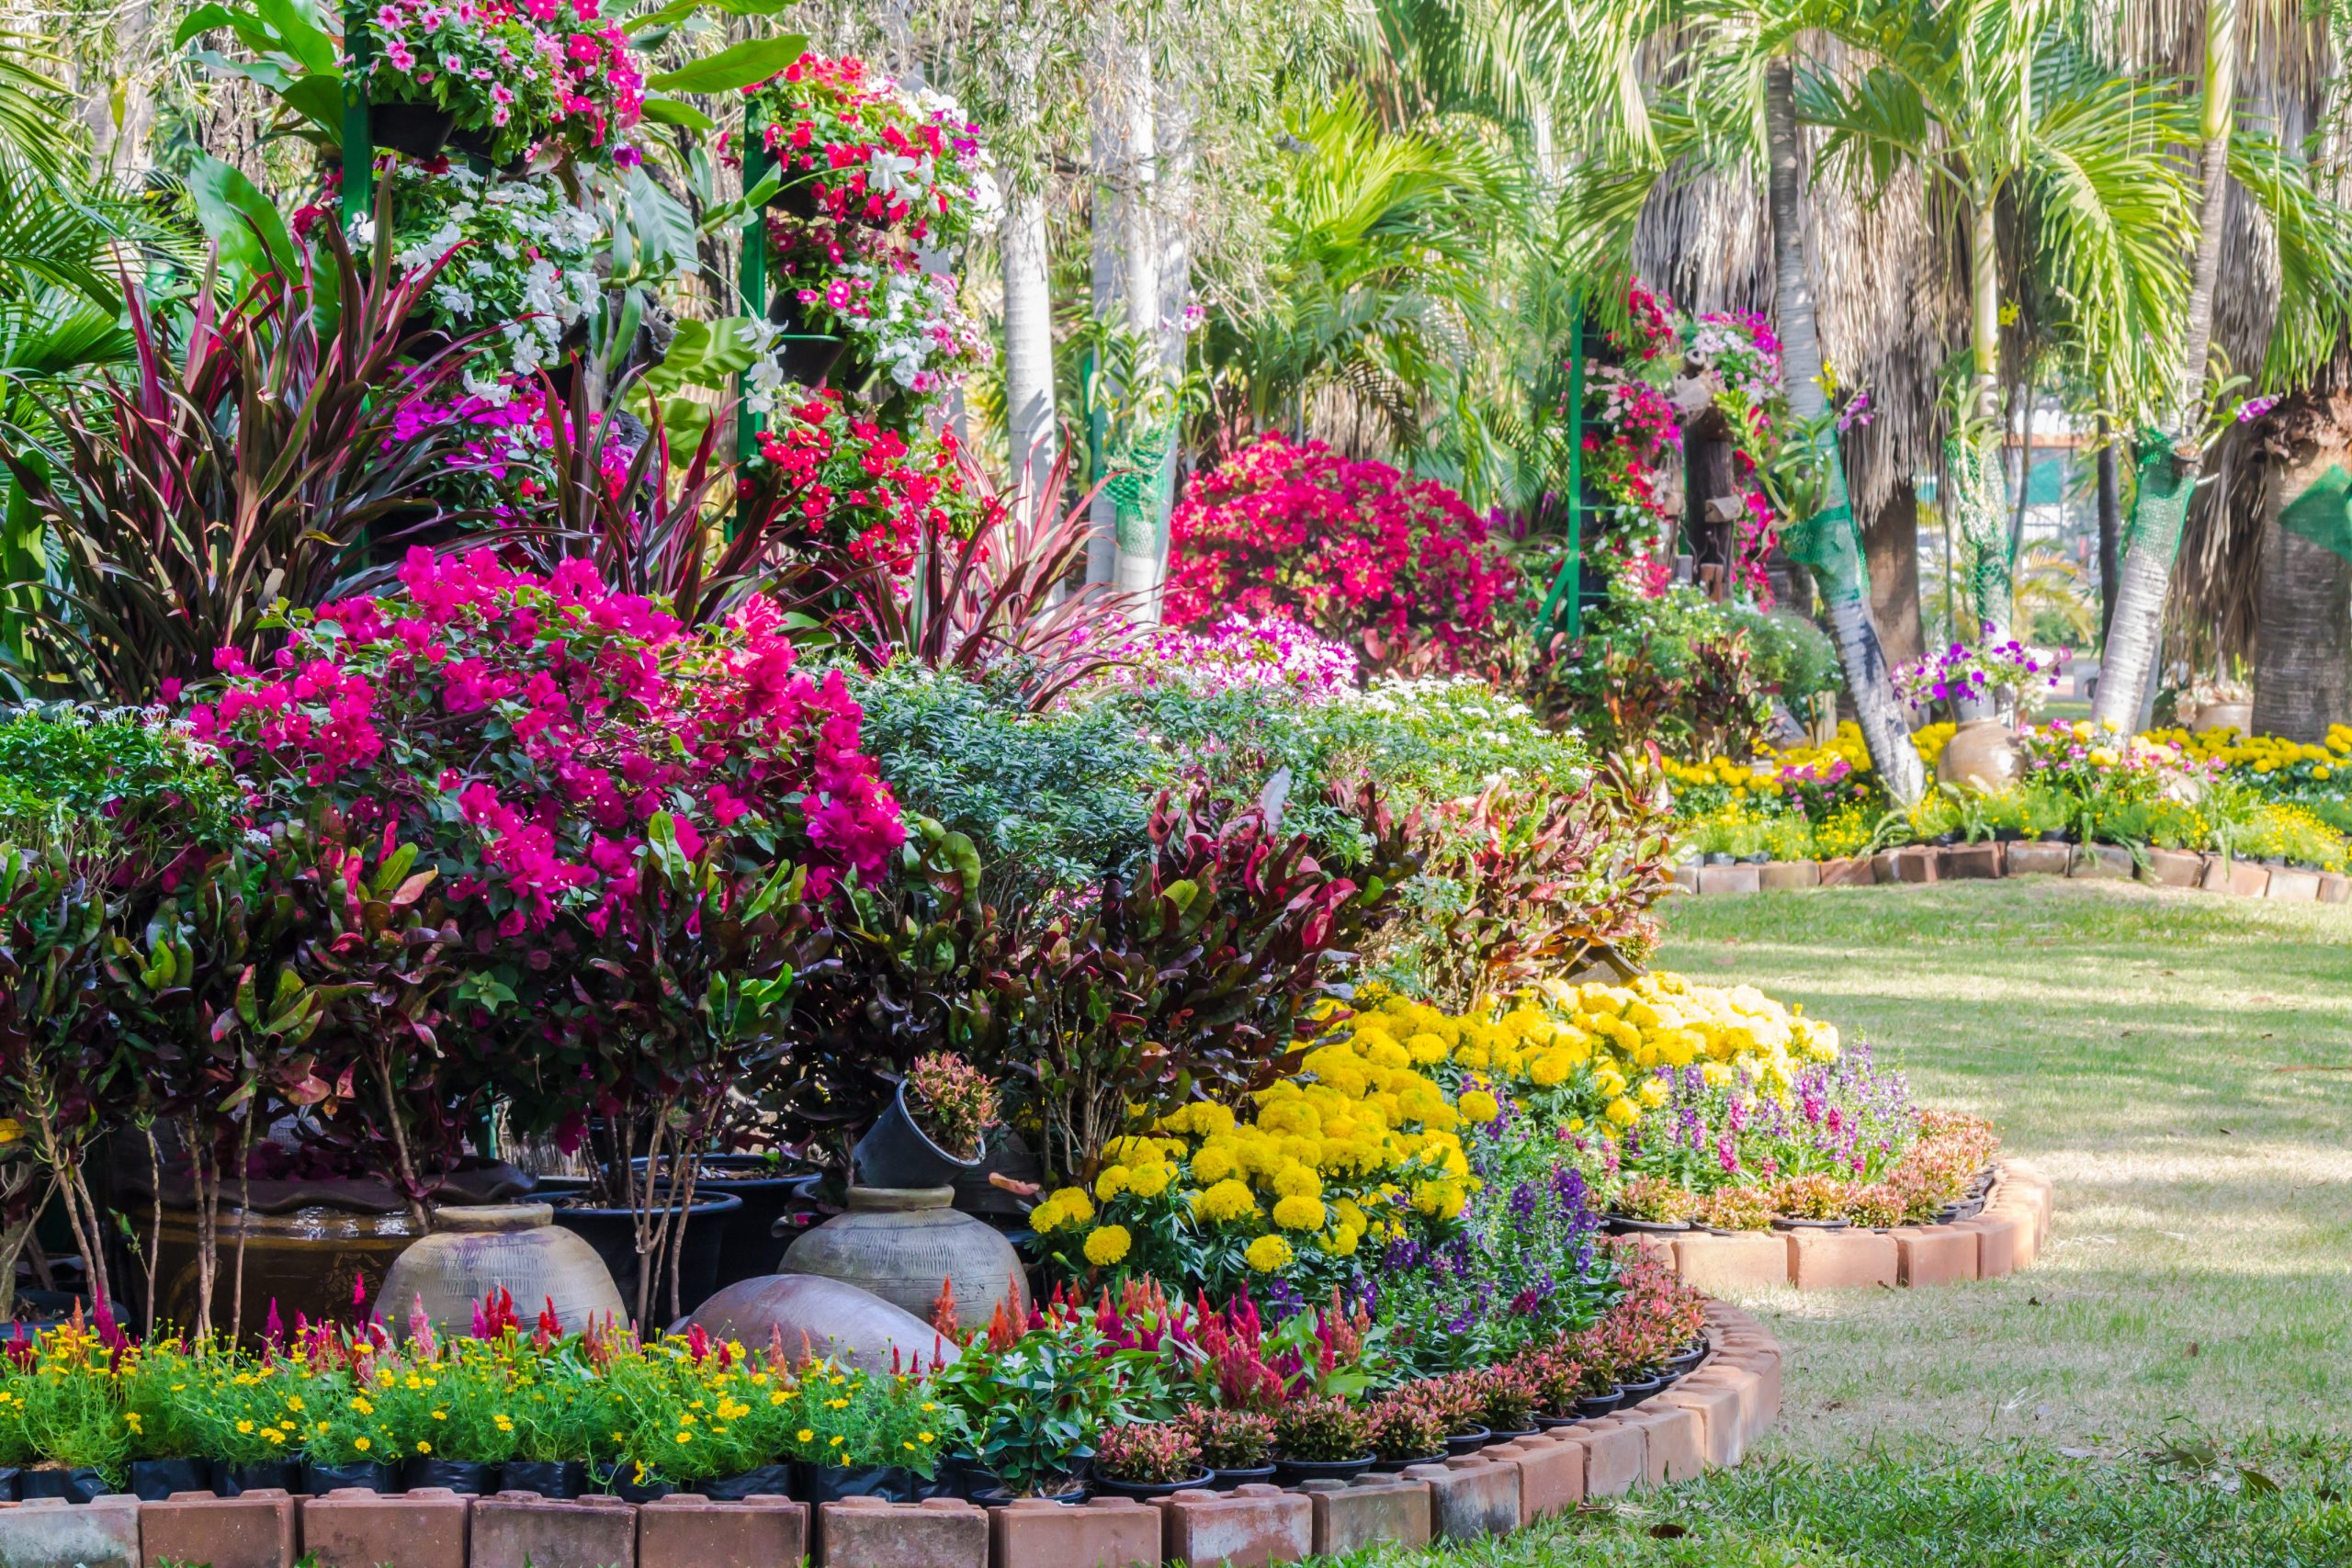 A beautiful garden with bricks lining all of the areas and lots of green with palm trees in the background. Many of the flowers are yellow and pink.